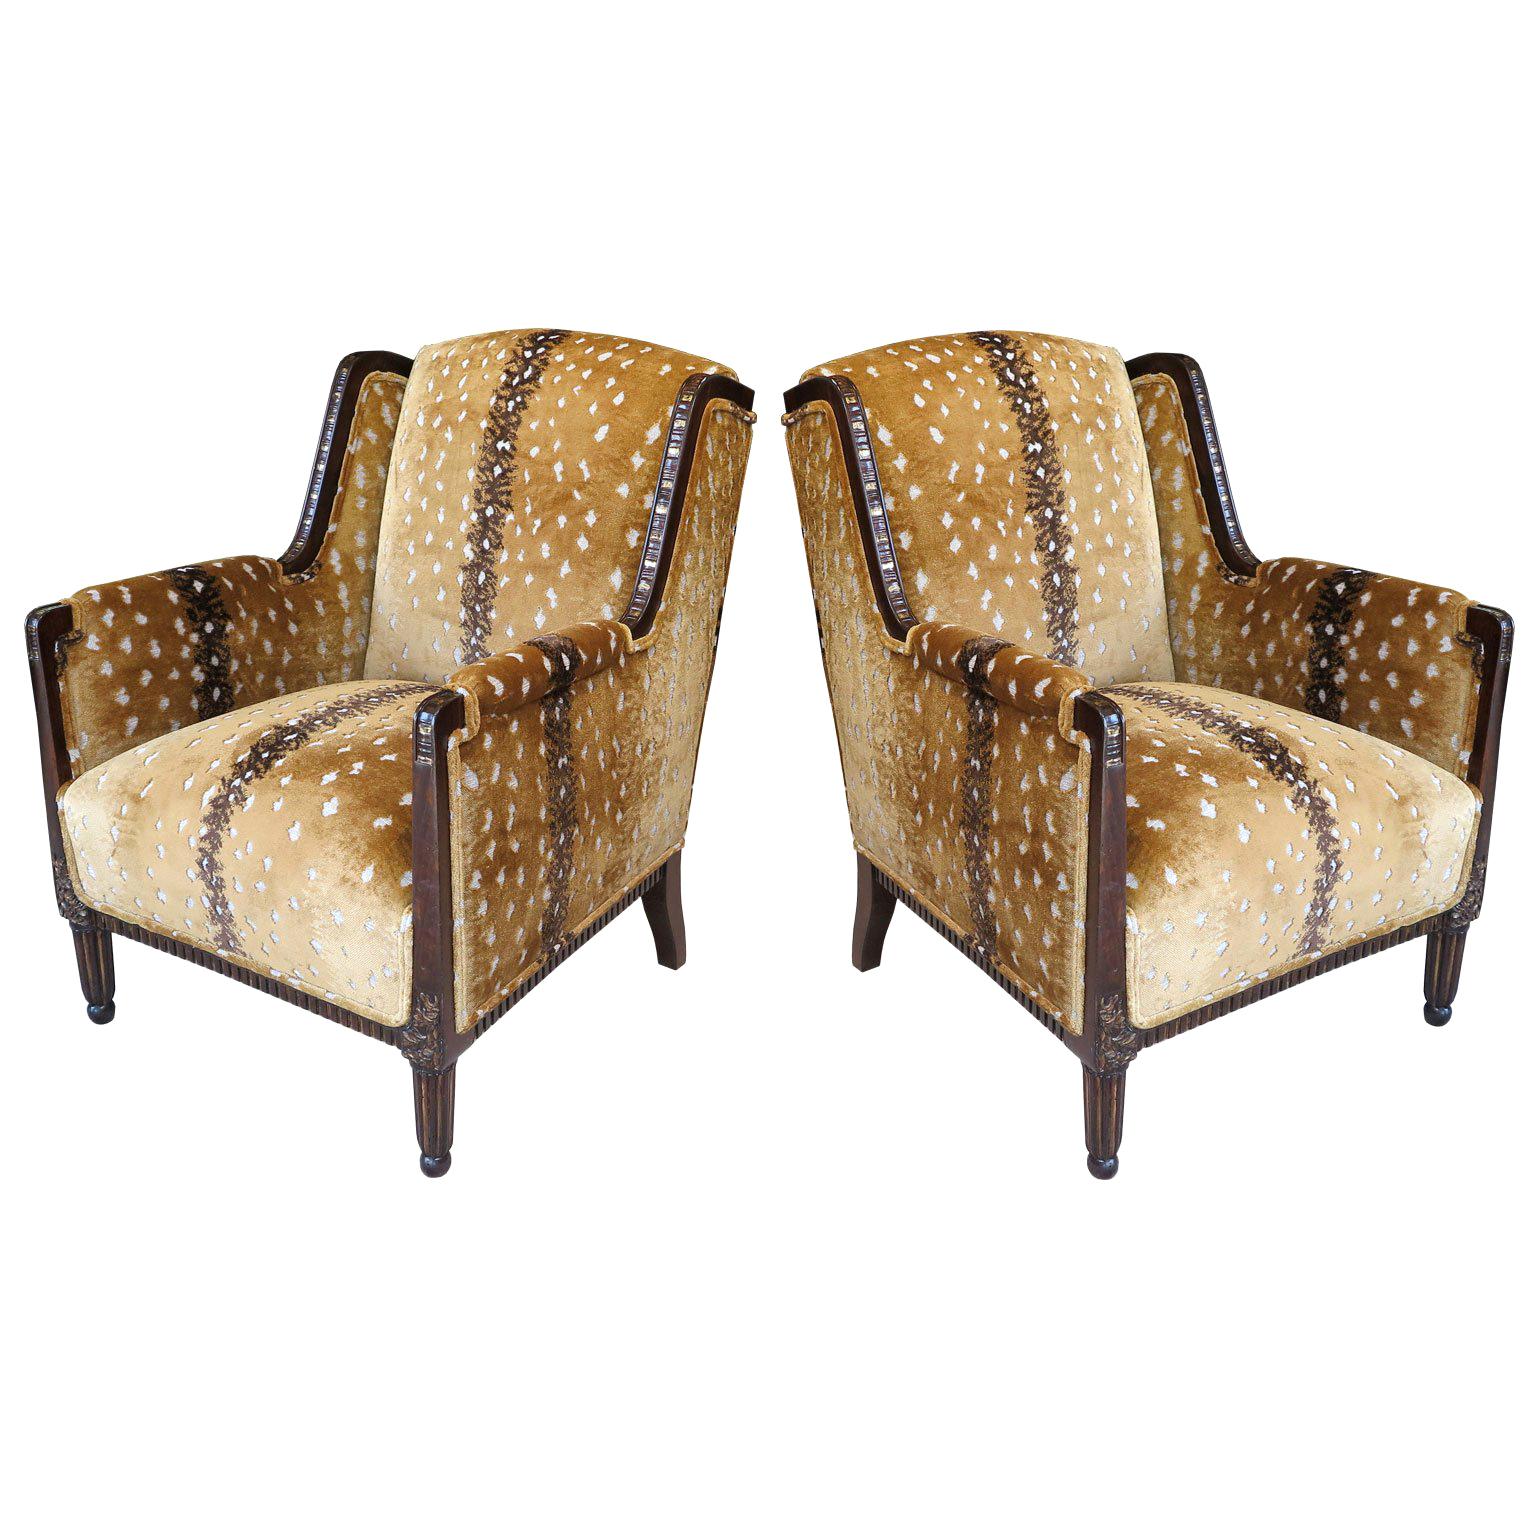 French Art Deco Classic Wingback Style Chairs in Antelope Fabric